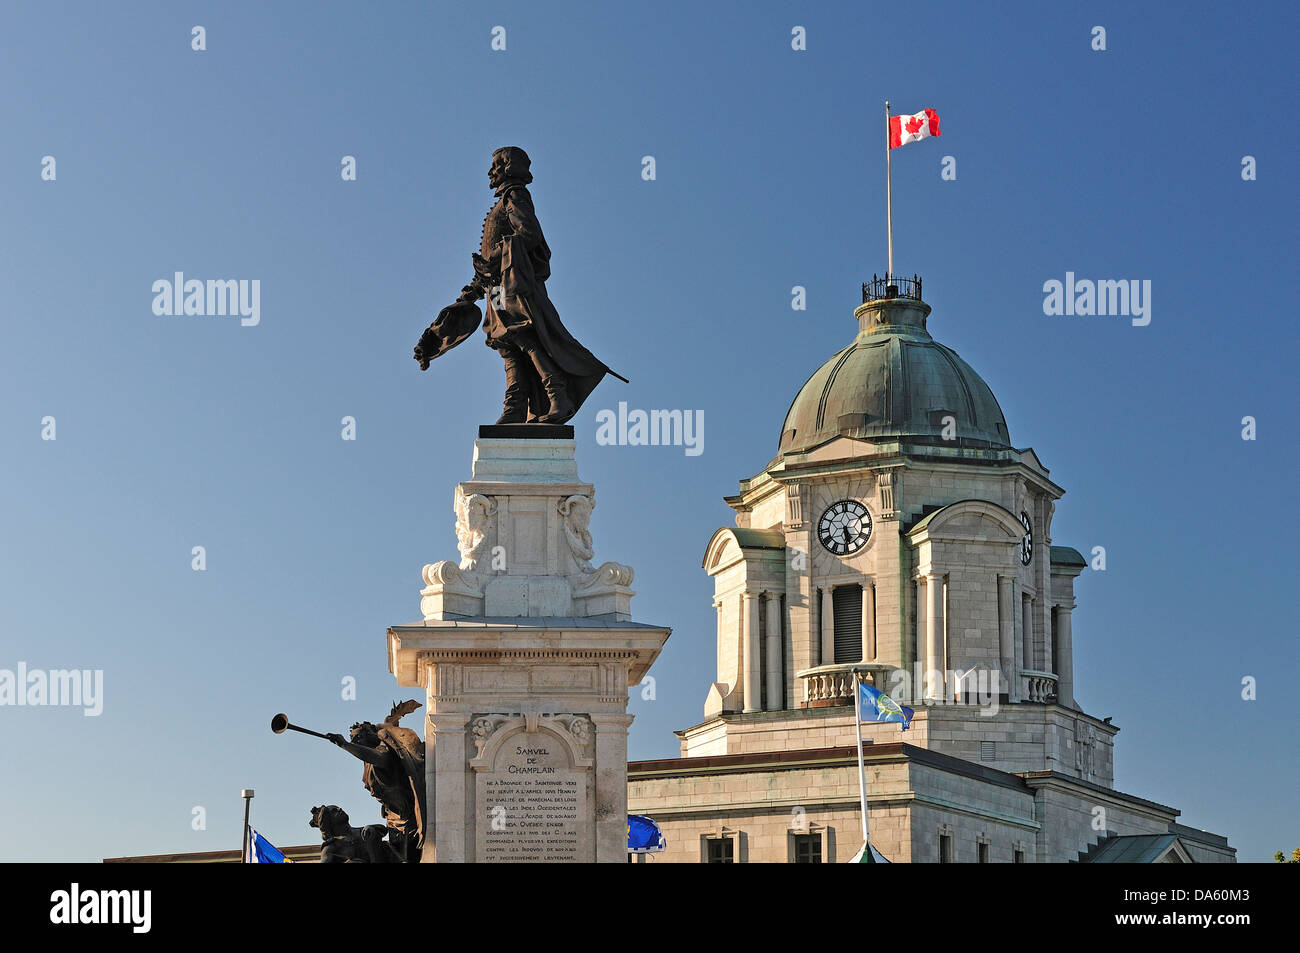 Canada, Canadian, Flag, Old Town, Quebec, Quebec City, Sculpture, Statue, Statue, Samuel, Champlain, breeze, historical, history Stock Photo